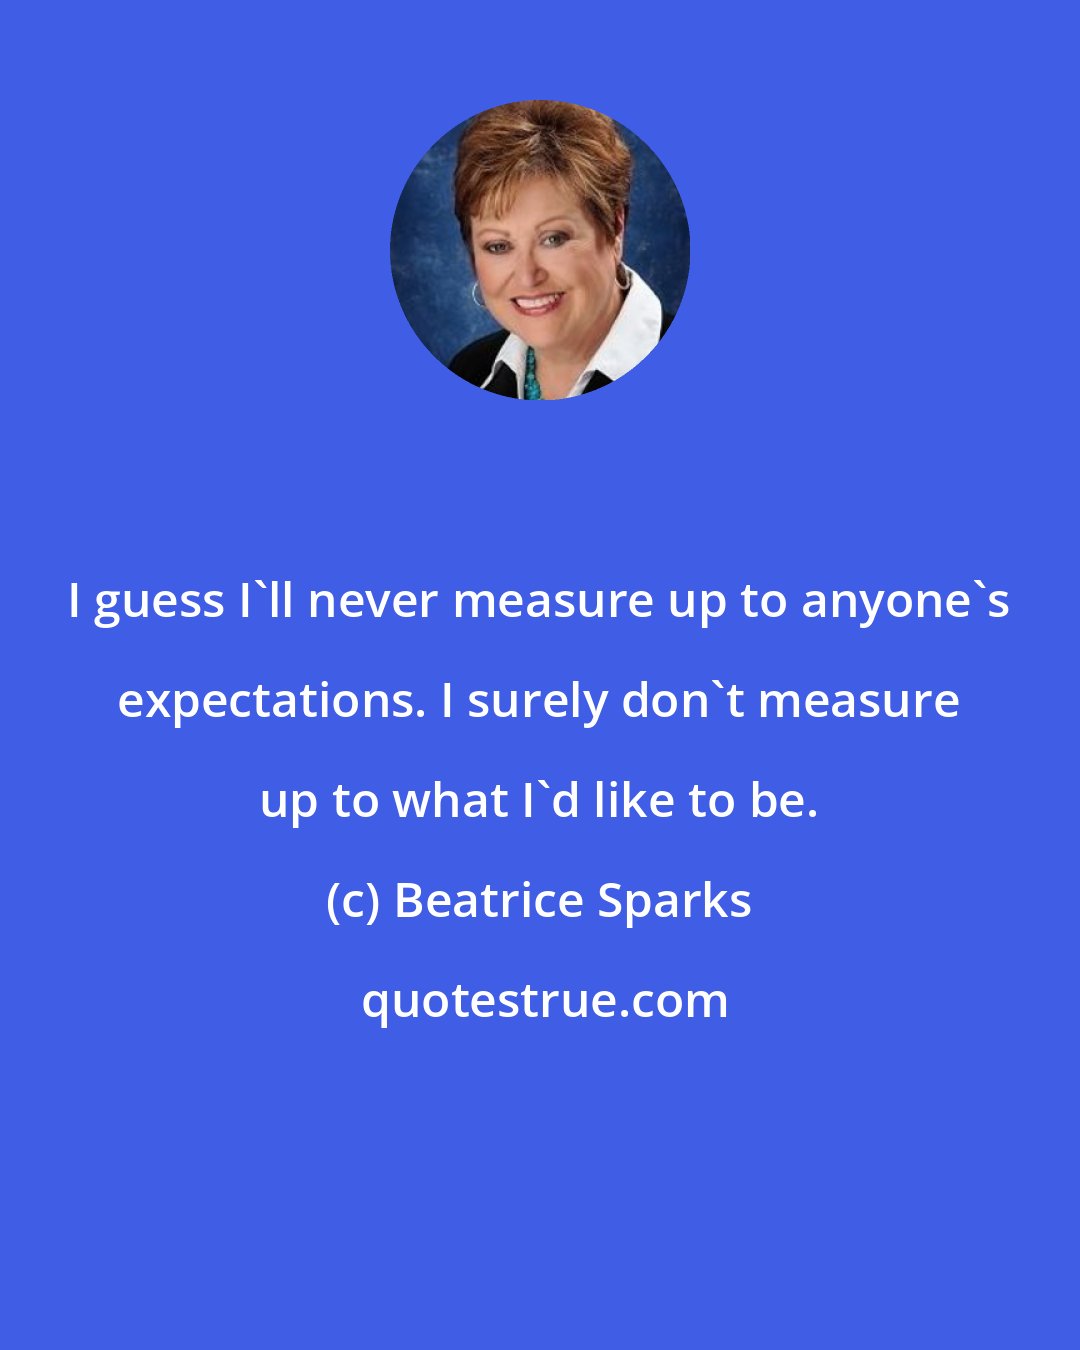 Beatrice Sparks: I guess I'll never measure up to anyone's expectations. I surely don't measure up to what I'd like to be.